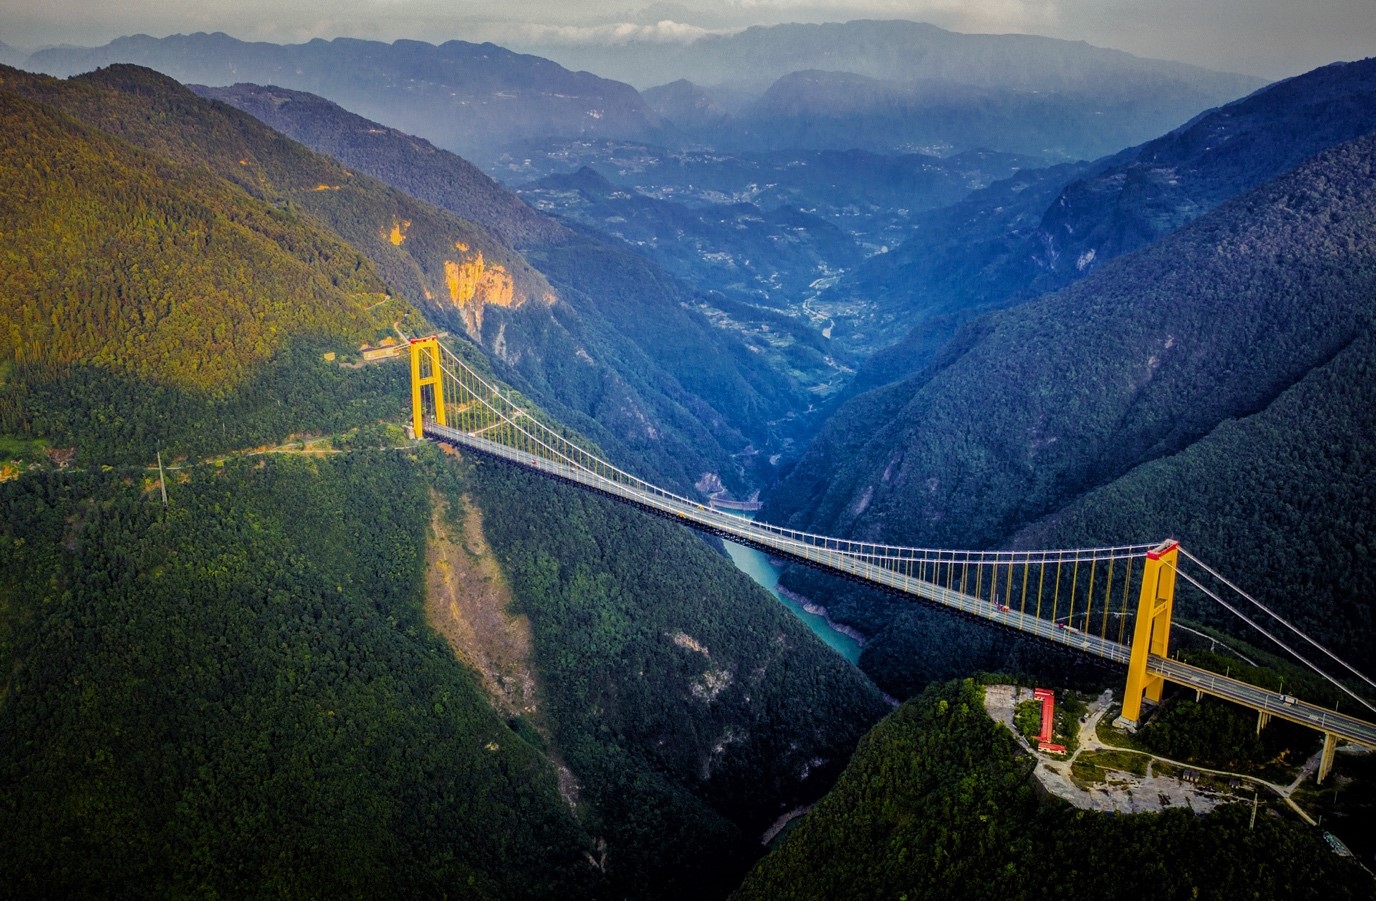 Aerial view of Siduhe Bridge on Shanghai-Chongqing Highway in central China's Hubei